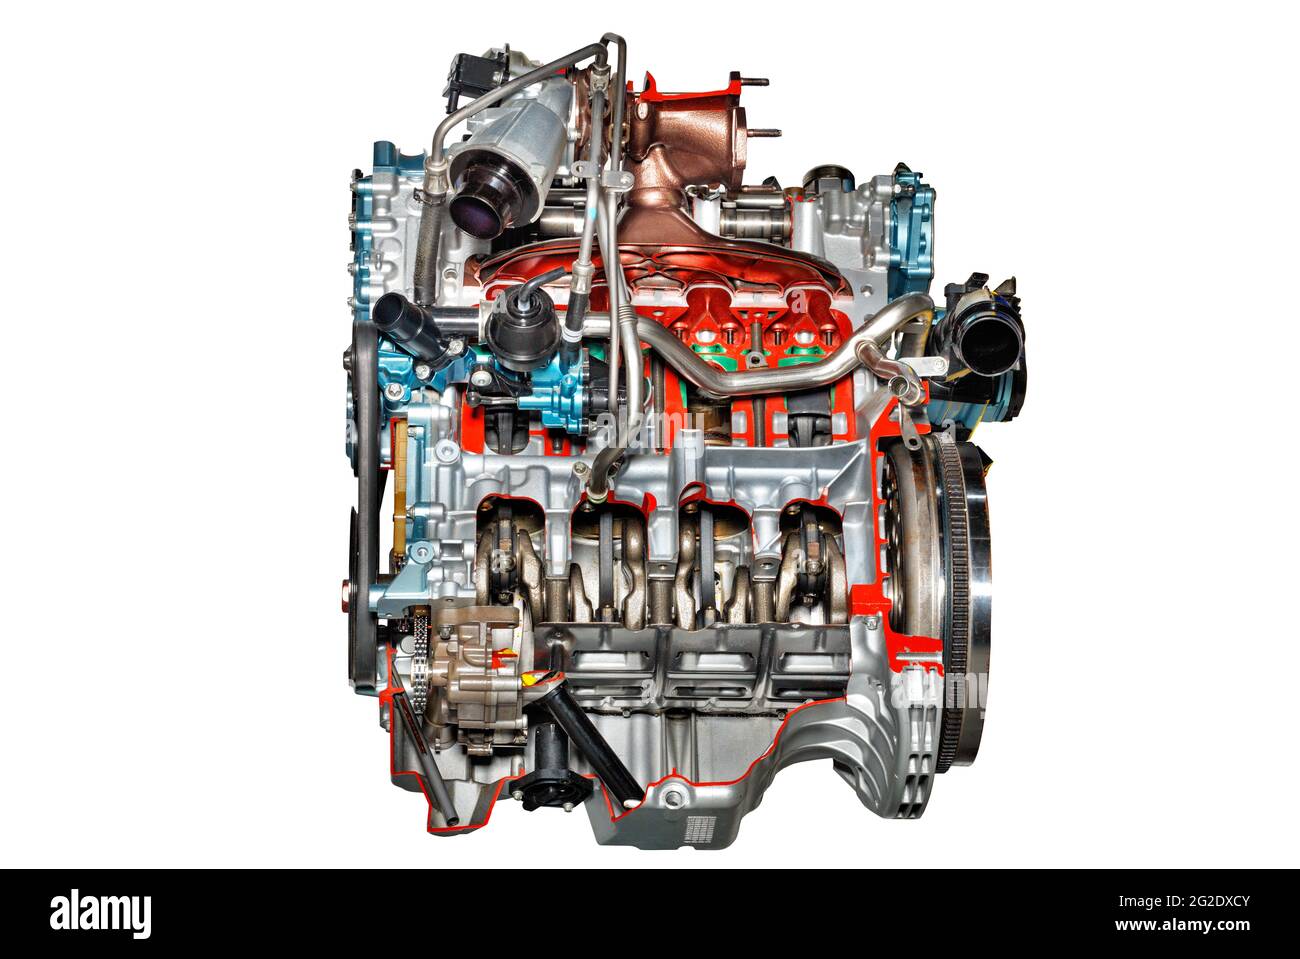 Piston Motor High Resolution Stock Photography And Images Alamy